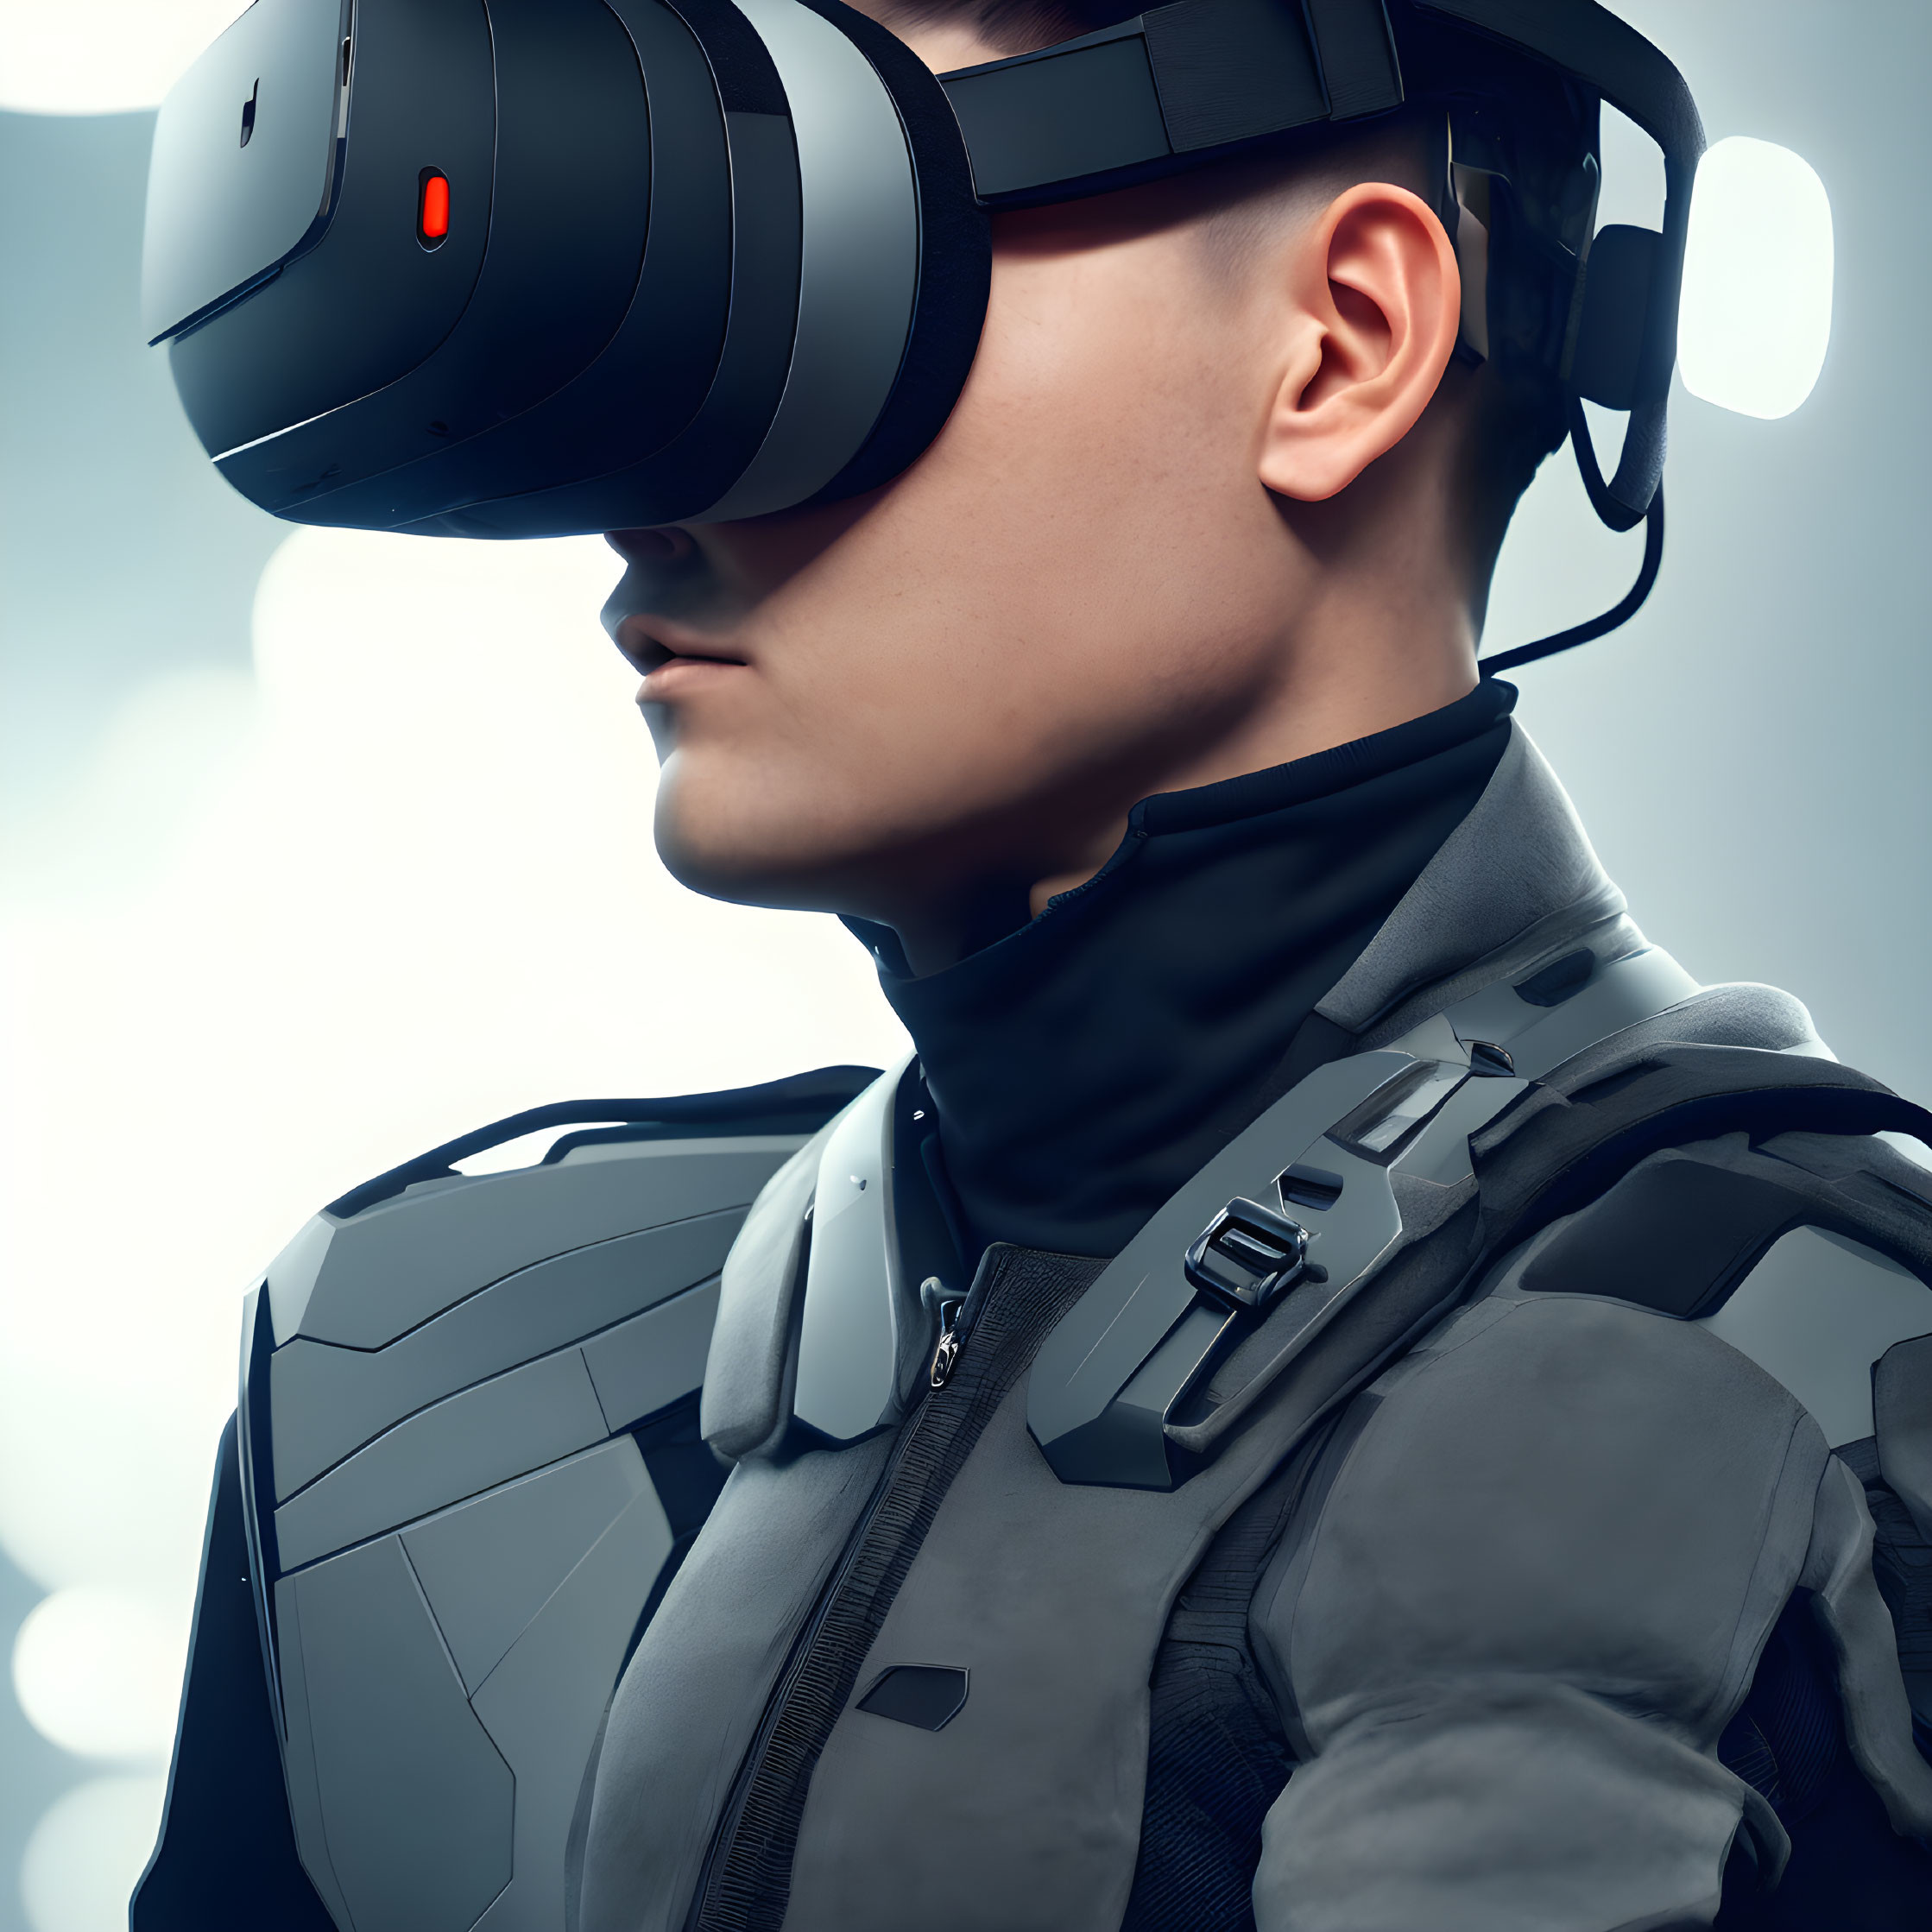 Futuristic VR headset and body armor on person against blue background